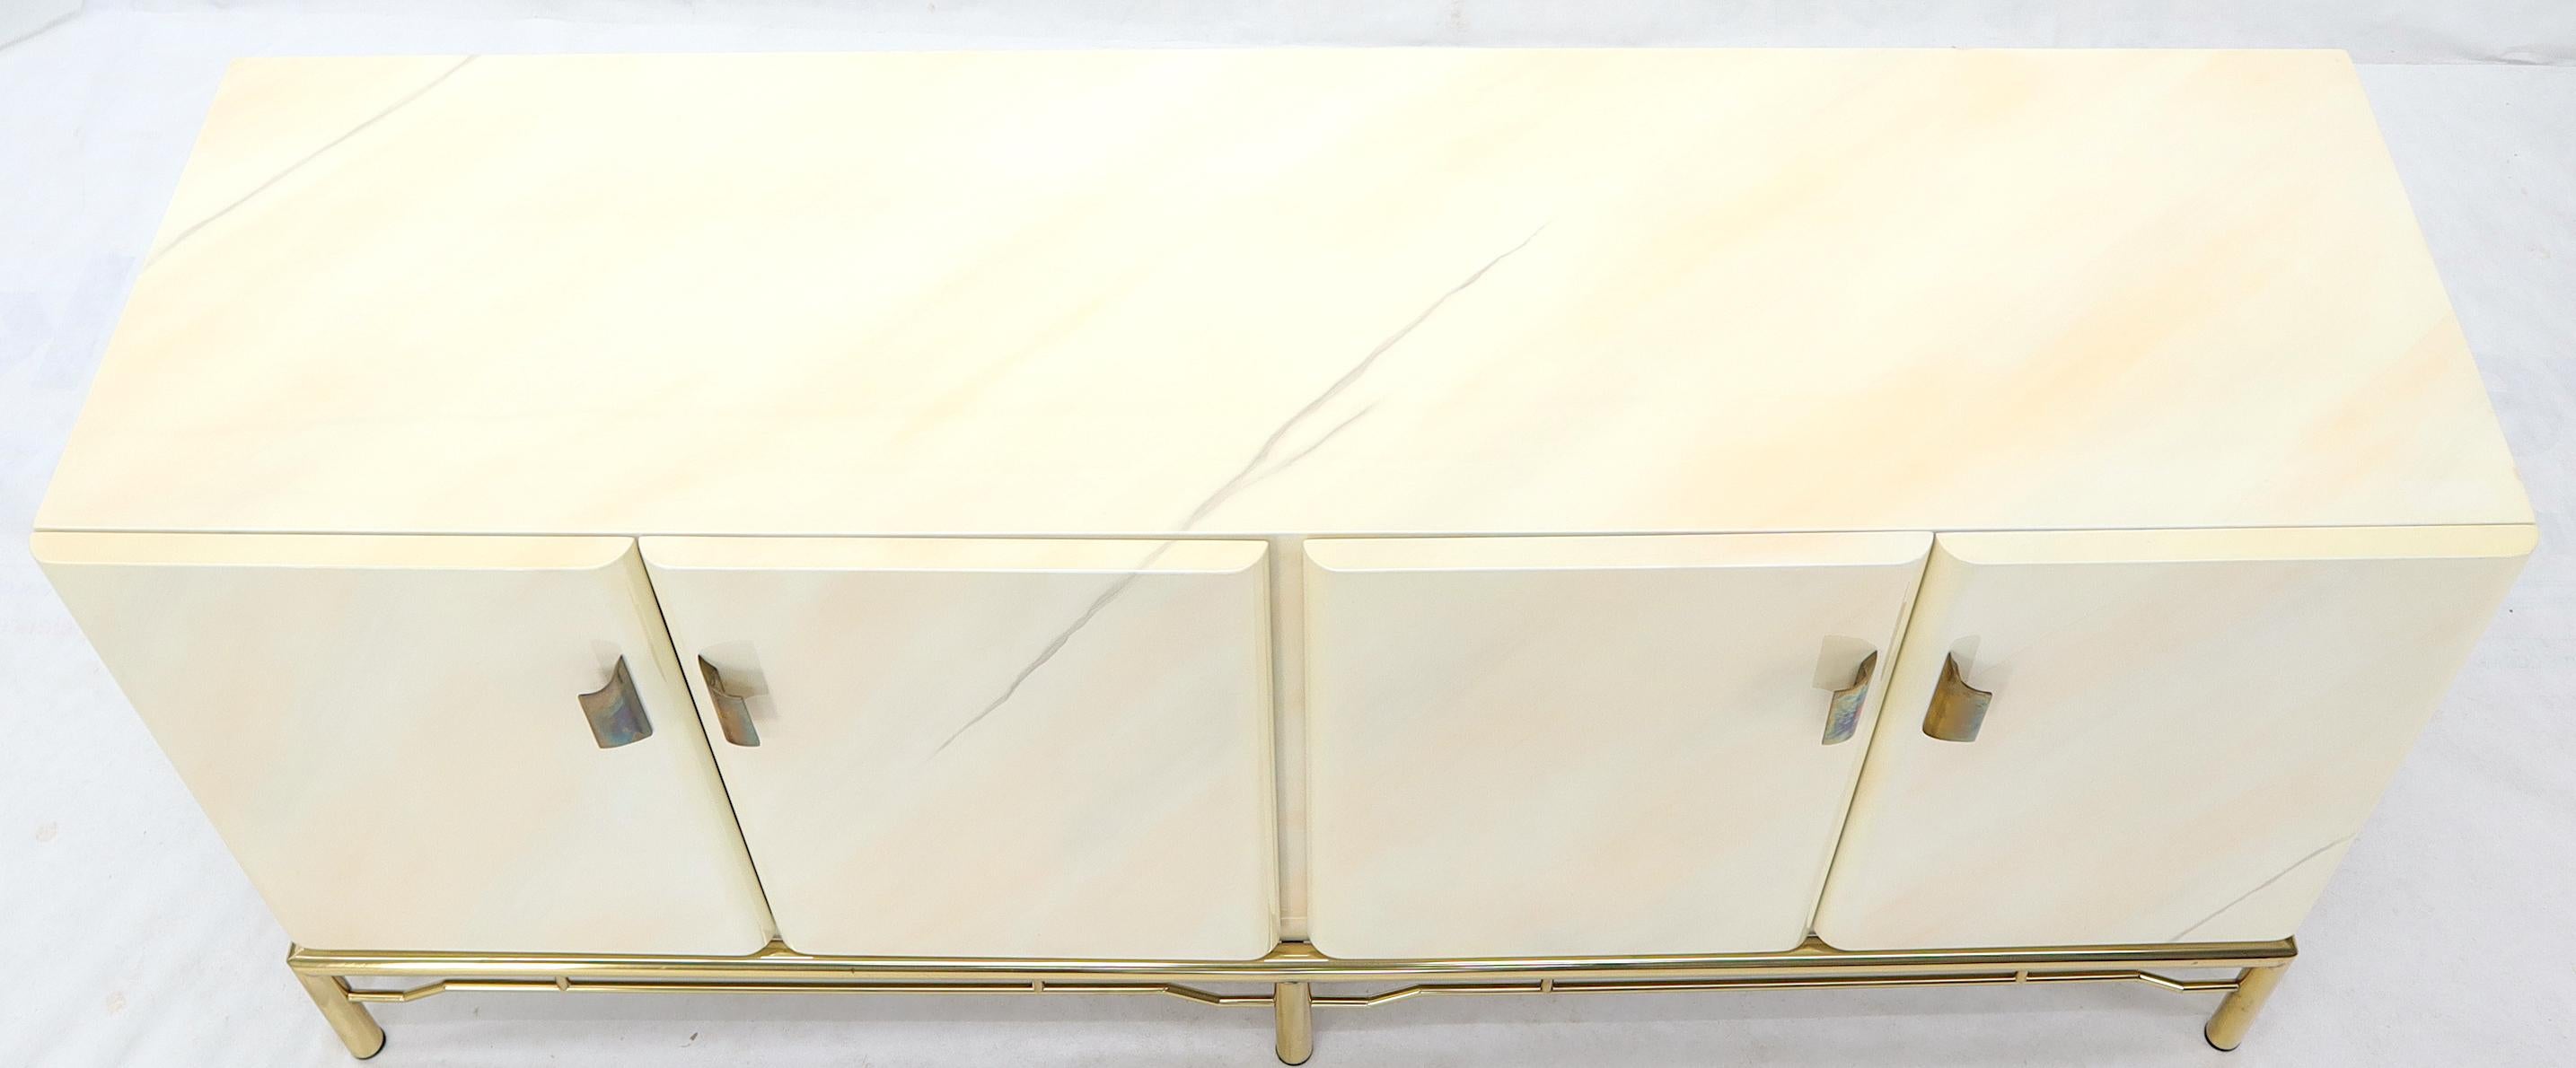 American Mid-Century Modern White Lacquer Faux Finish Door 4 Doors Credenza on Brass Base For Sale